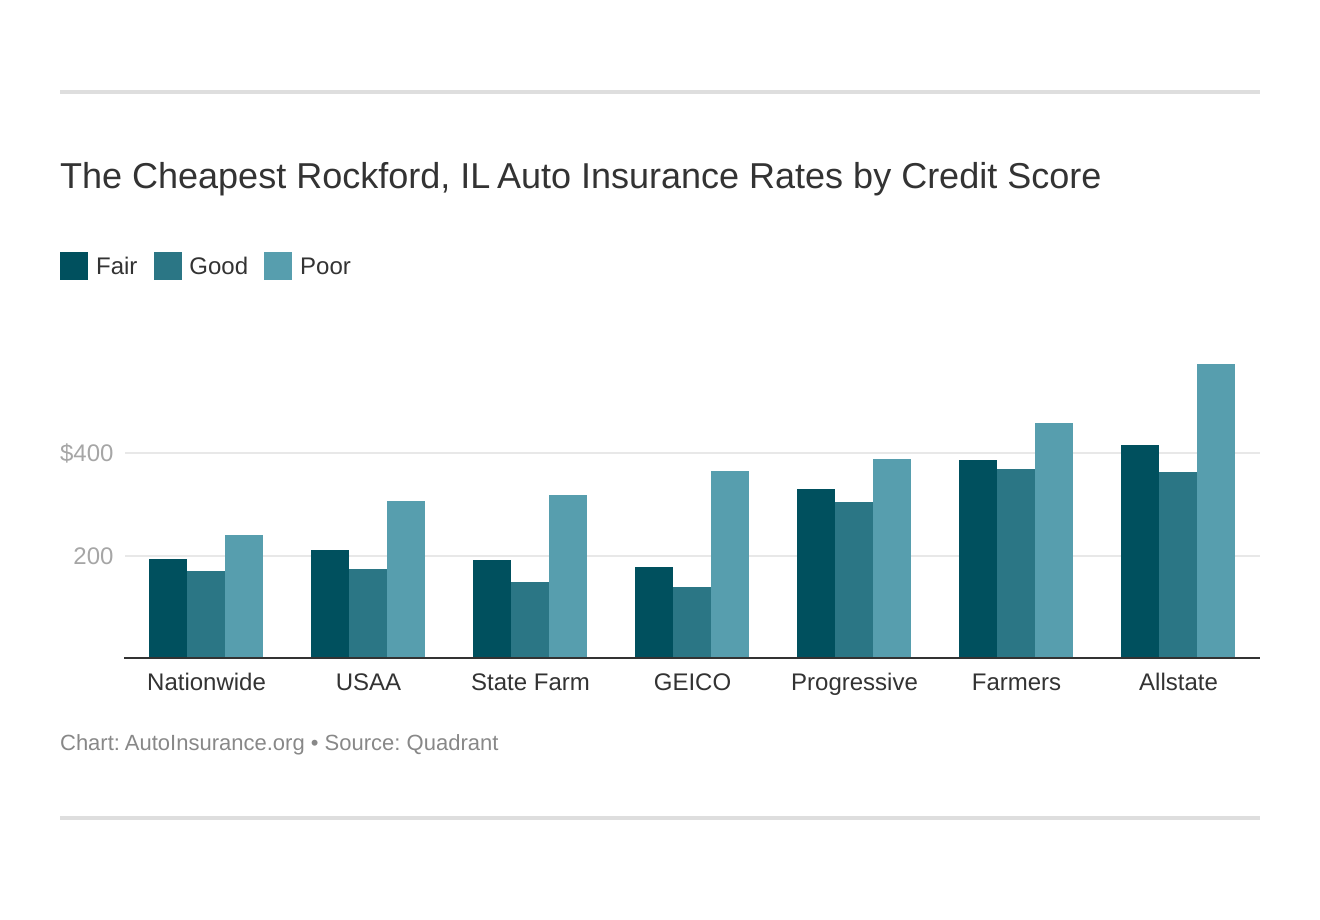 The Cheapest Rockford, IL Auto Insurance Rates by Credit Score